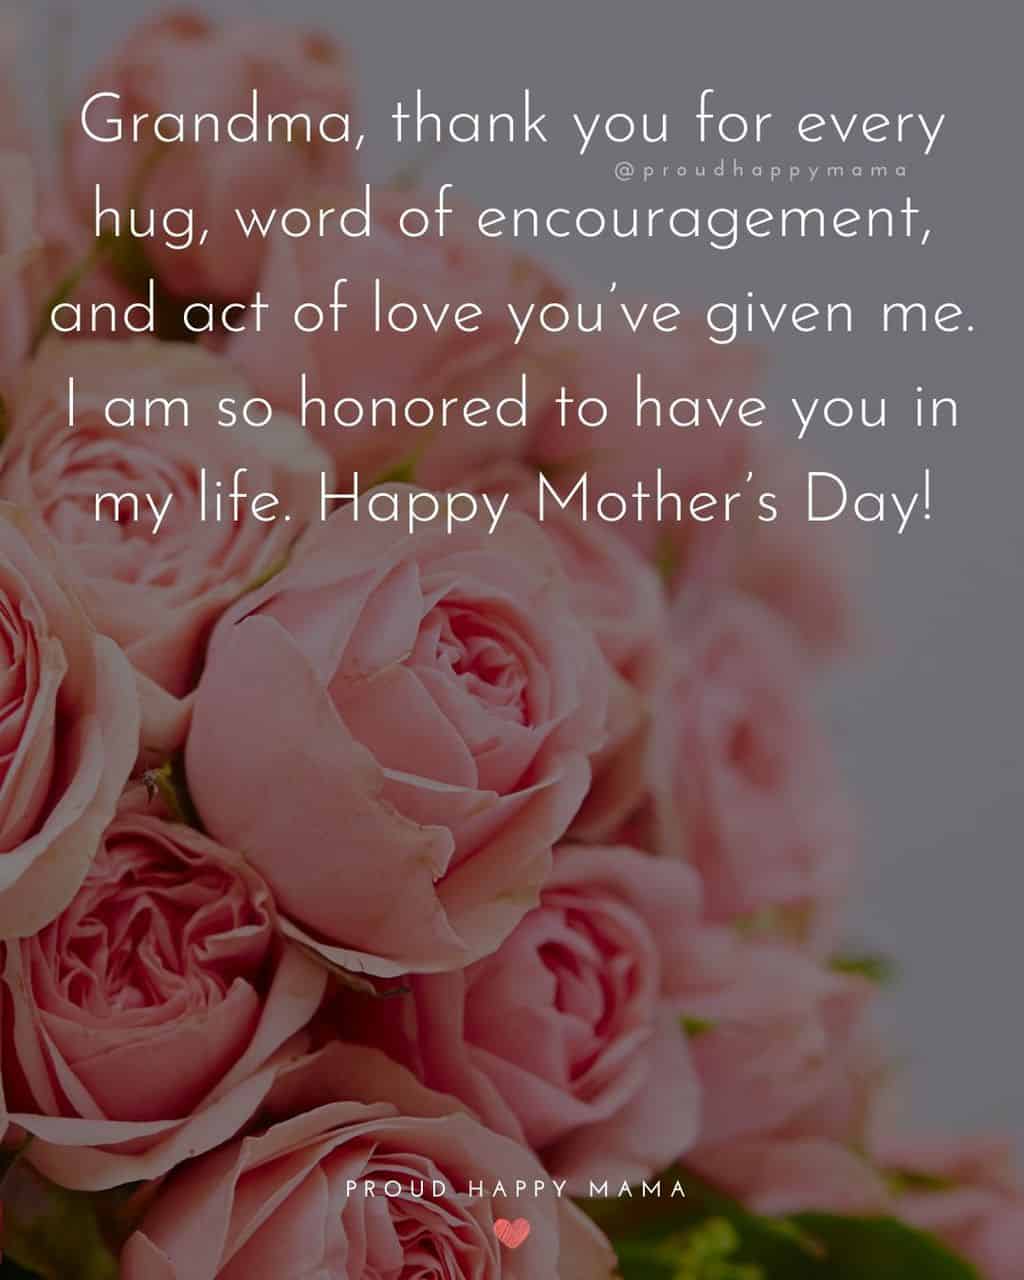 Happy Mothers Day Grandma Quotes - Grandma, thank you for every hug, word of encouragement, and act of love youve given me. I am so honored to have you in my life. Happy Mothers Day!